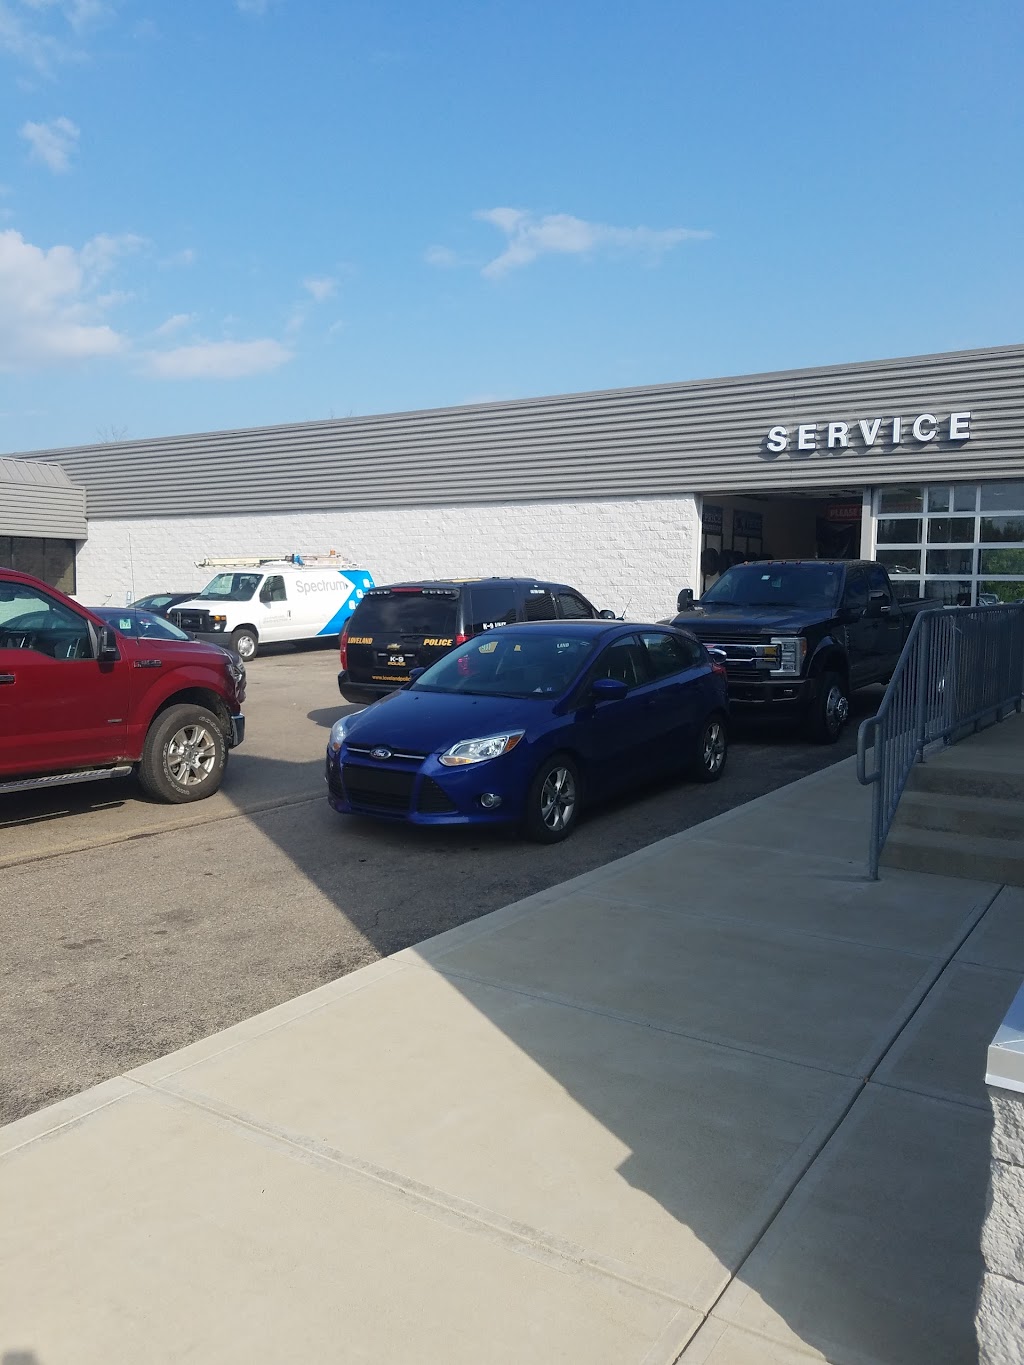 Mike Castrucci Ford Sales, Inc. | 1020 OH-28, Milford, OH 45150, USA | Phone: (513) 831-7010